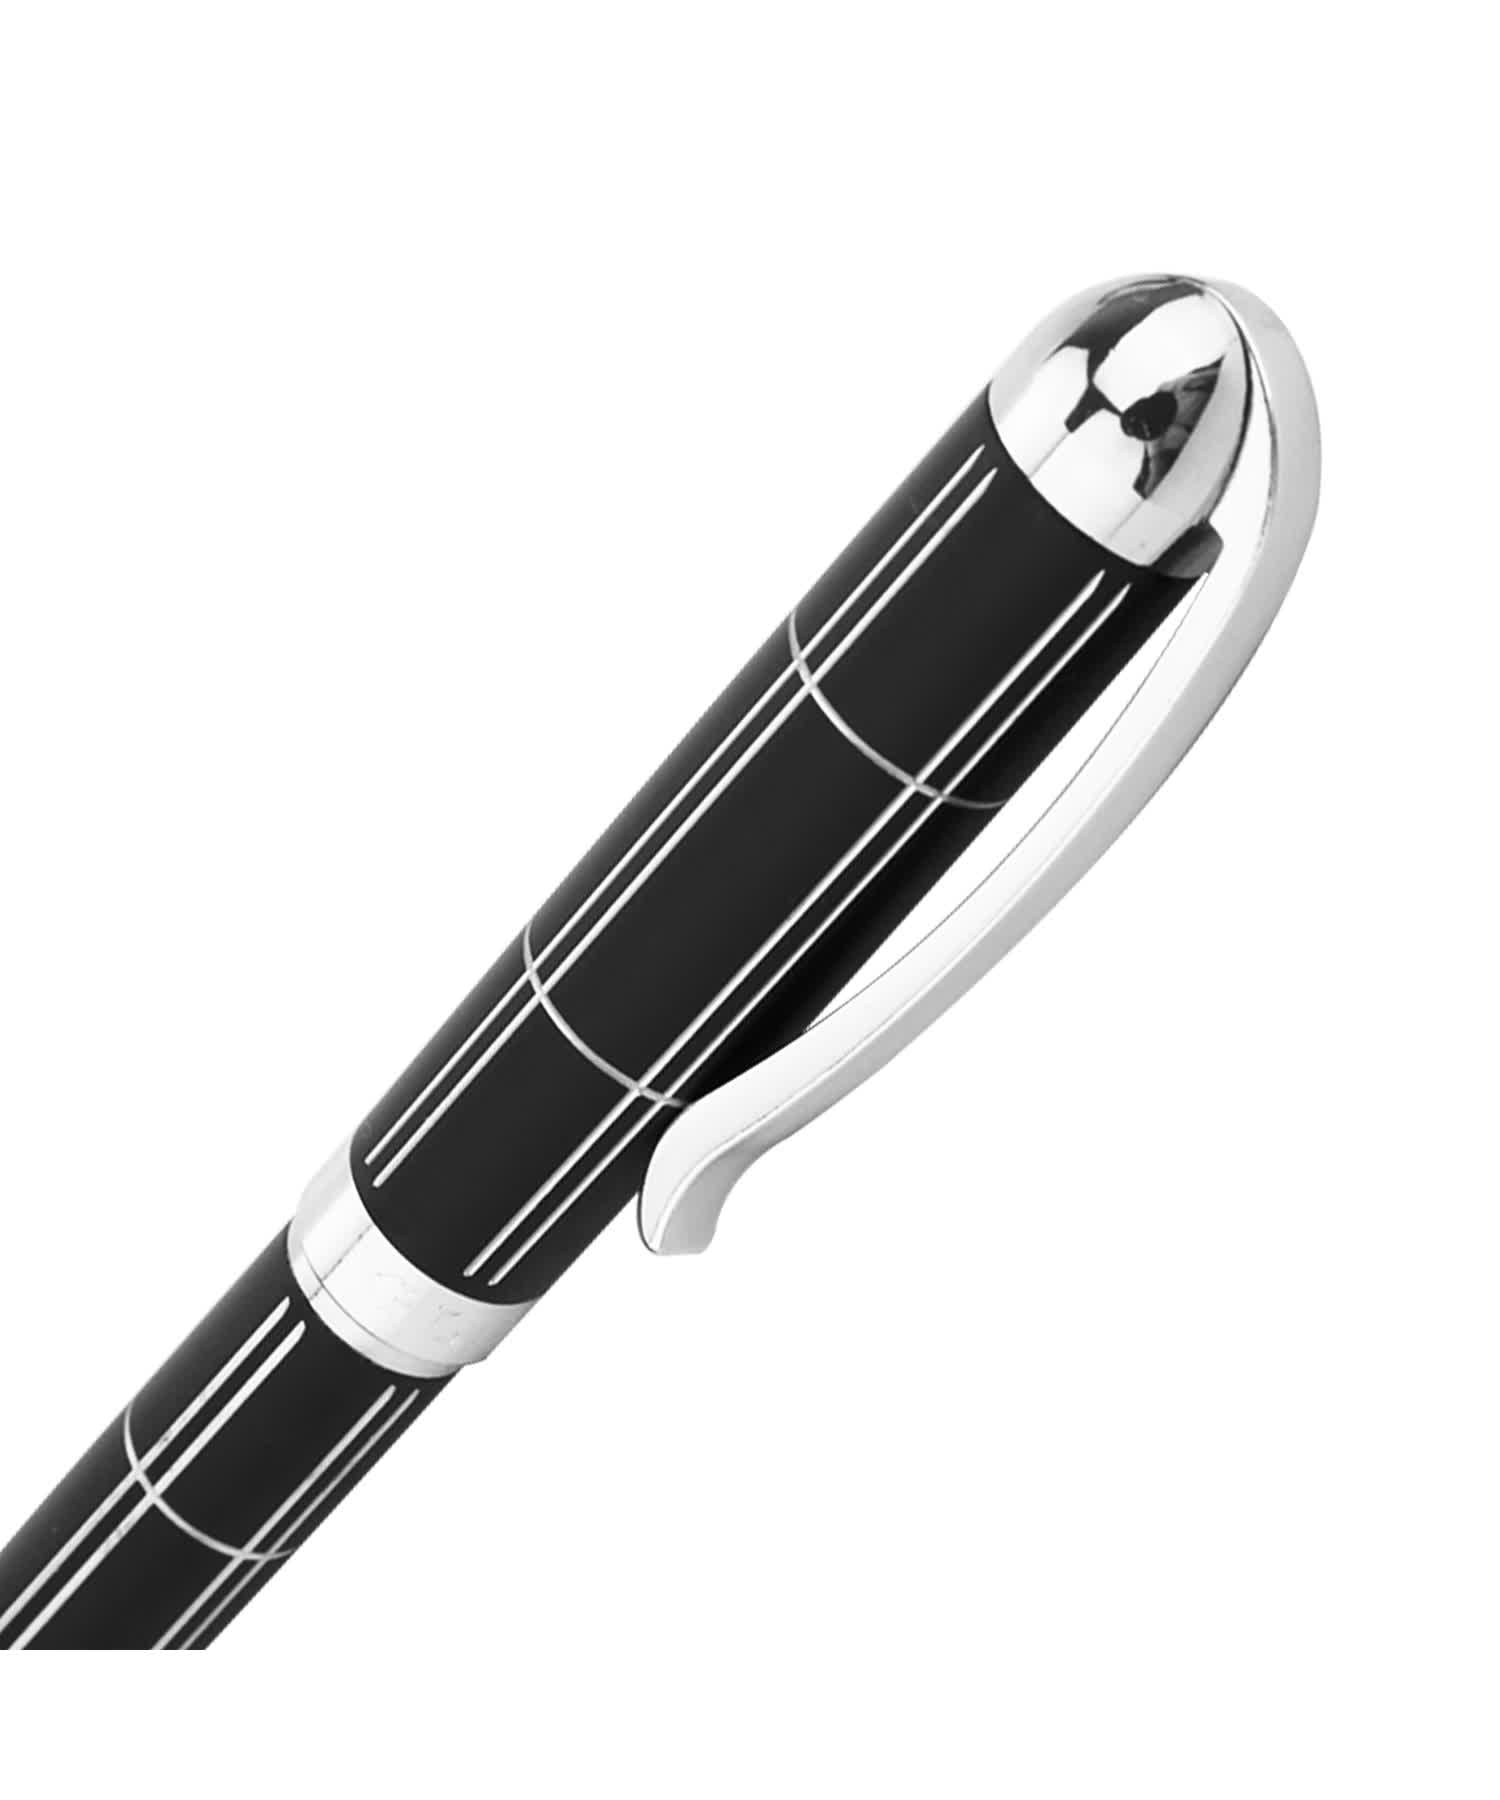 Croton Ballpoint Pen With Laser Cut Grooves In Matte Black and Chrome Accents View 3